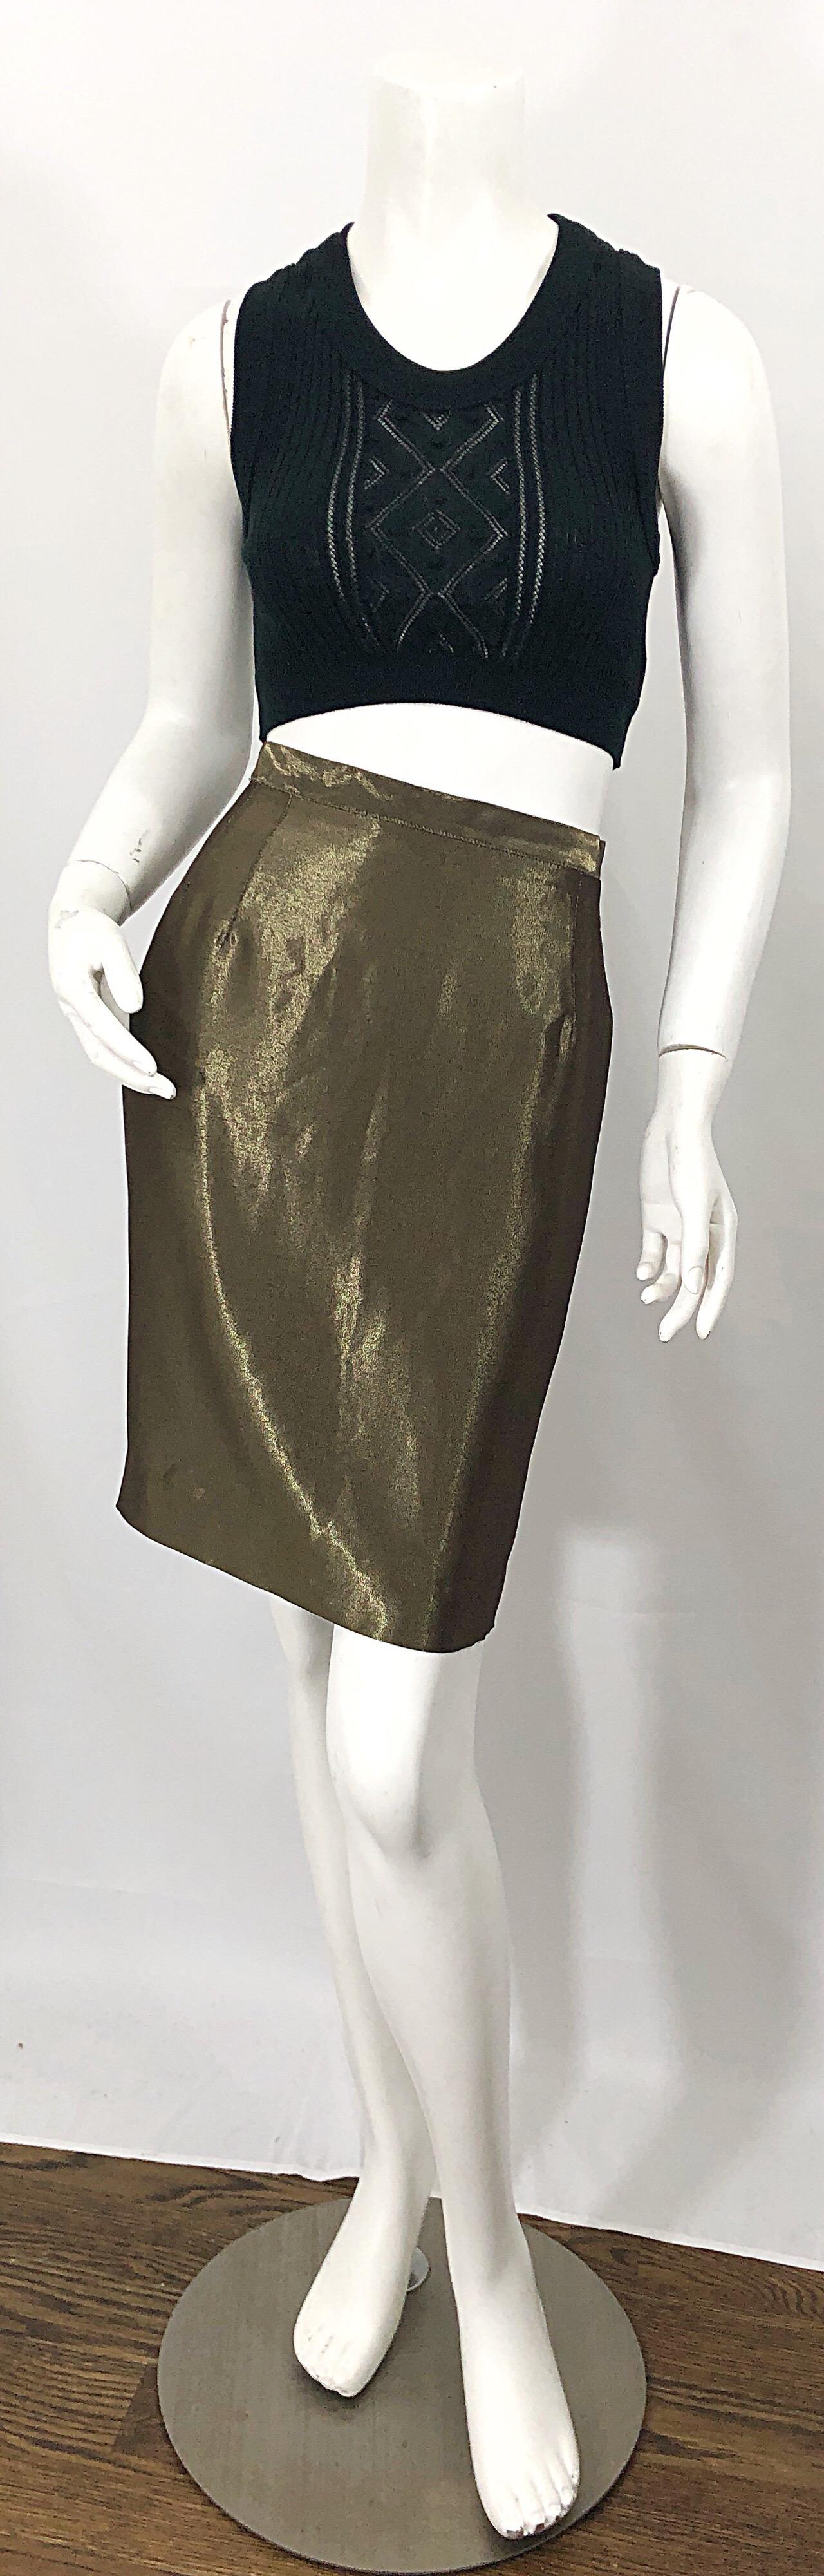 Chic 1990s GIANFRANCO FERRE metllaic bronze / golden high waisted pencil skirt! The perfect pairing for a basic black or white blouse. Skirt is even prettier in person, and looks like liquid silk. Hidden zipper up the back with button closure. Fully